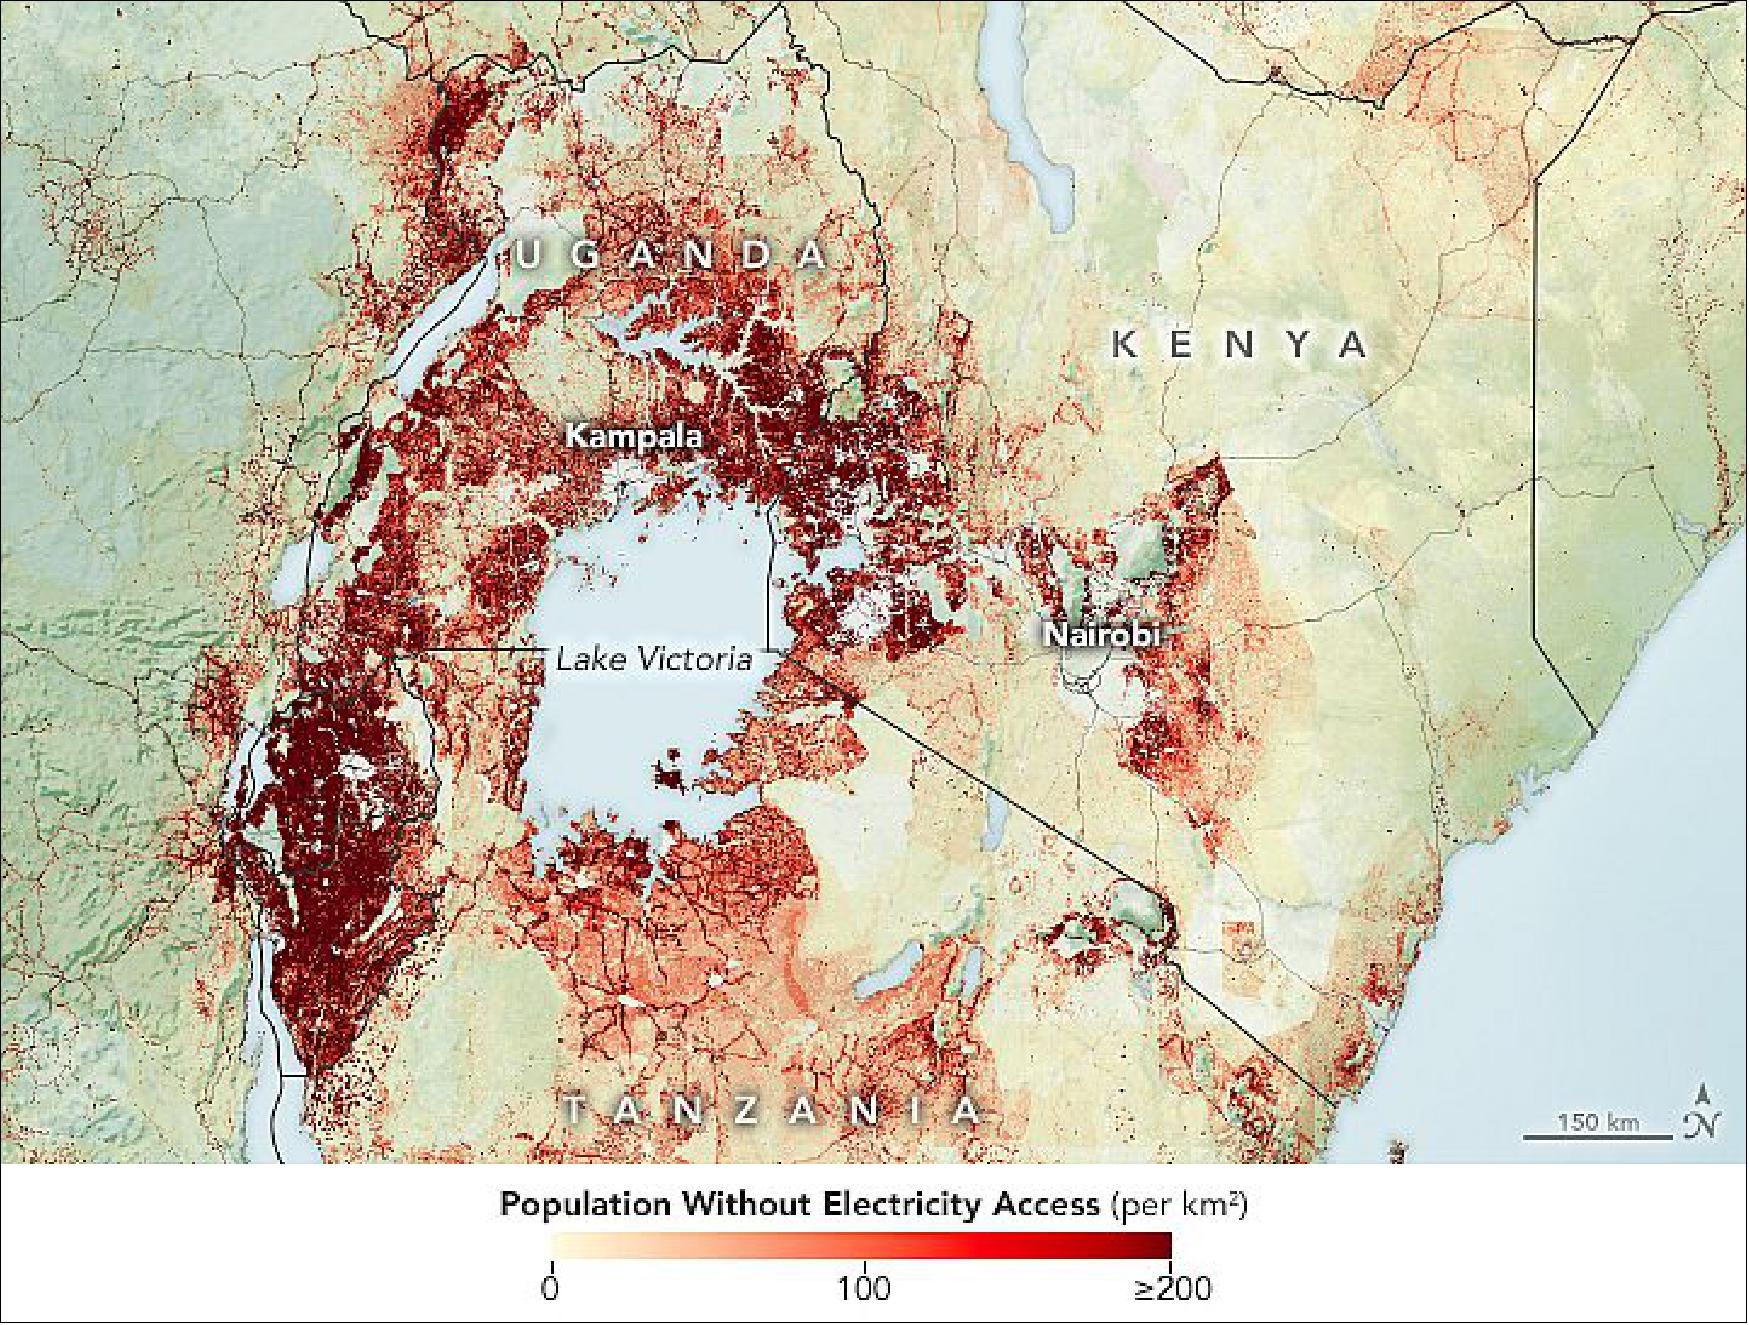 Figure 50: The maps of Figures 10, 51 and 52 show the team’s electrification analysis for 2018 around Lake Victoria, in Ethiopia, and across sub-Saharan Africa, respectively. The maps were created using processed nighttime light data—namely public lighting and, partly, house lighting—from the Visible Infrared Imaging Radiometer Suite (VIIRS) on the NOAA-NASA Suomi NPP satellite. The team also incorporated land cover type data from NASA’s Moderate Resolution Imaging Spectroradiometer (MODIS) to identify urban and rural settlements. Those datasets were overlaid with different gridded population products, such as the 1 km (0.60-mile) scale data from Oak Ridge National Laboratory’s LandScan to better understand how populations are distributed (image credit: NASA Earth Observatory images by Lauren Dauphin, using data from Falchetta, Giacomo, et al. (2019) and Falchetta, Giacomo, et al. (2020). Story by Kasha Patel)